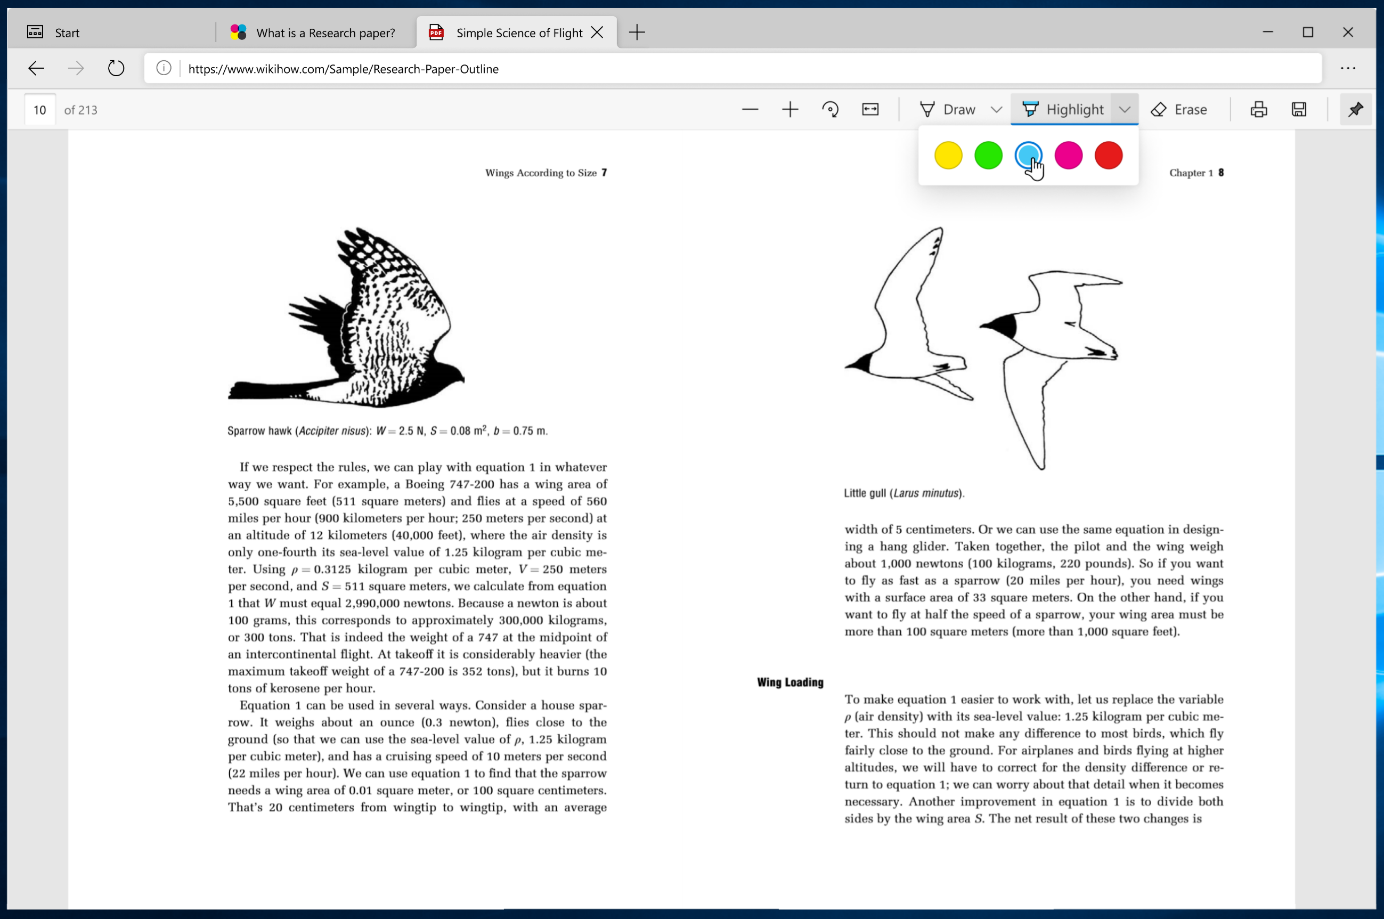 Microsoft Edge extends tools for the PDF reader - Microsoft Tech